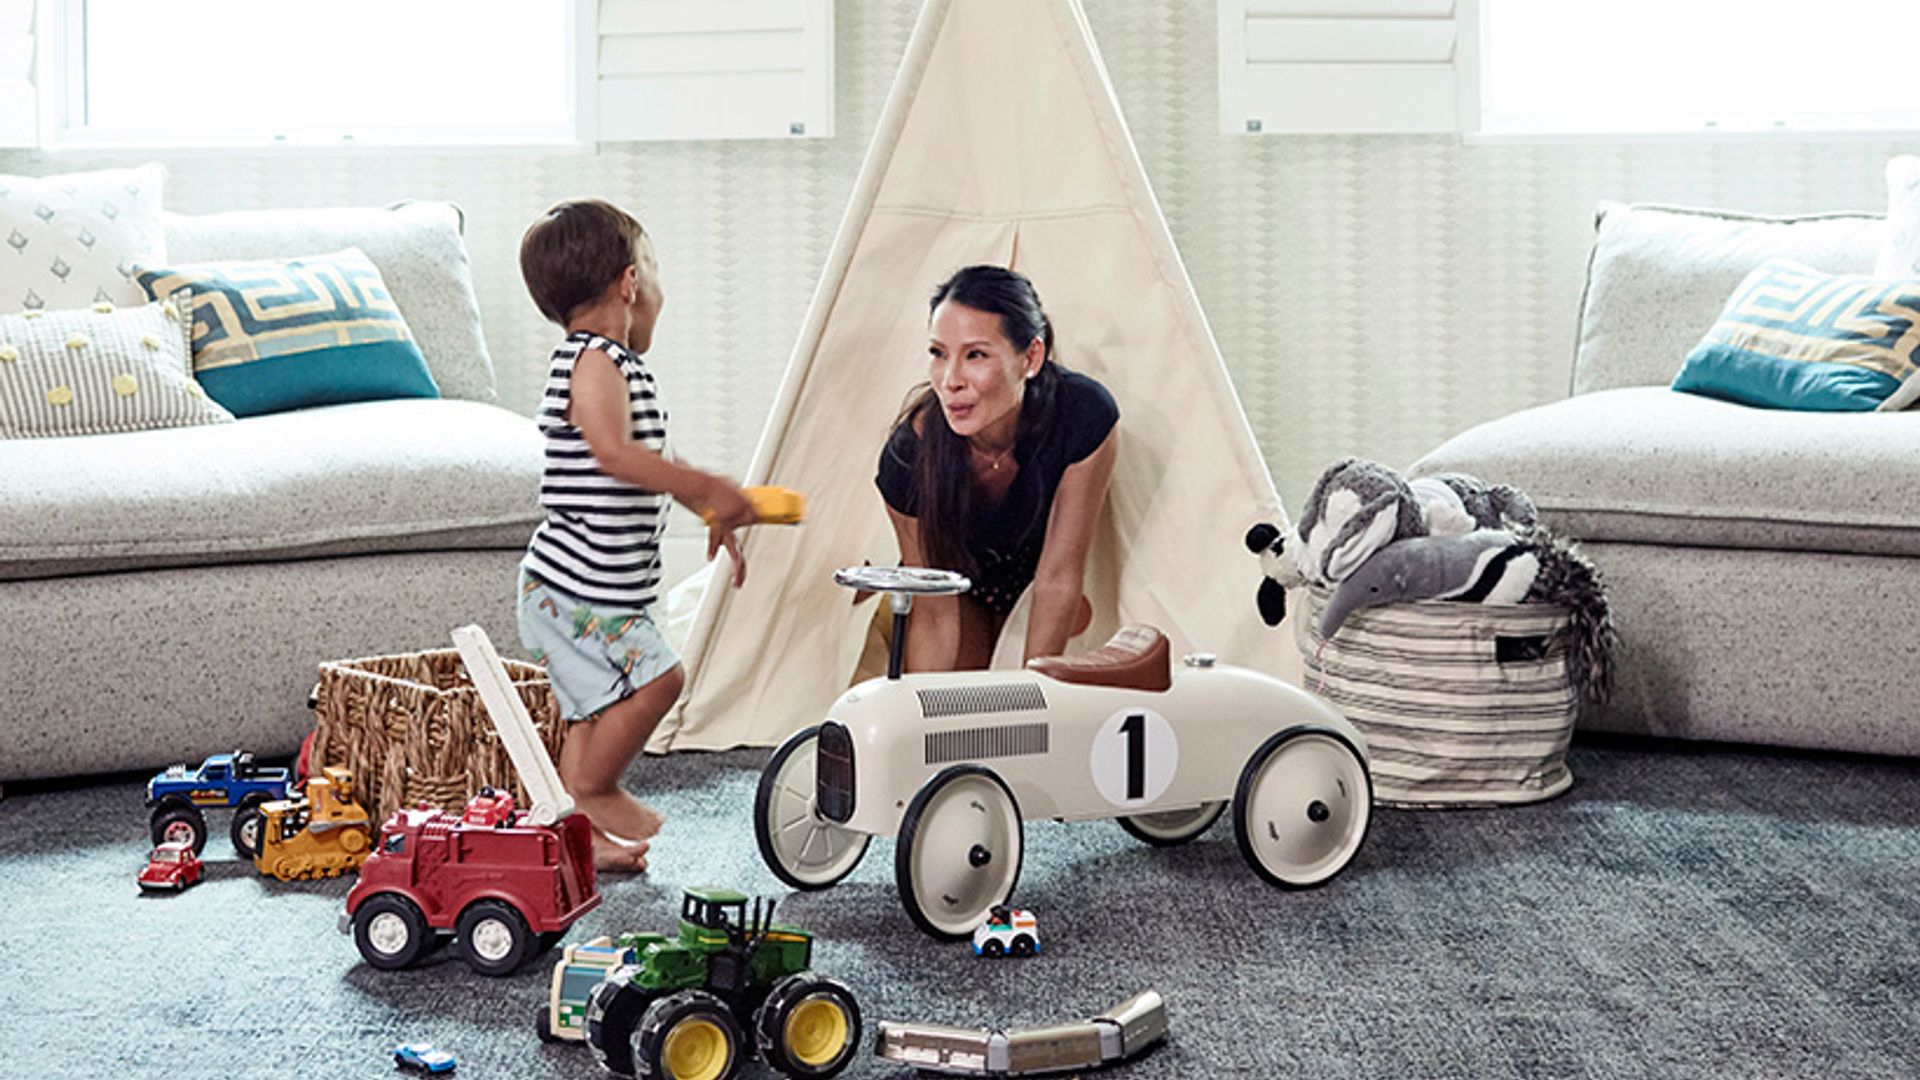 Lucy Liu takes fans inside her home and her son's incredible nursery – see the photos